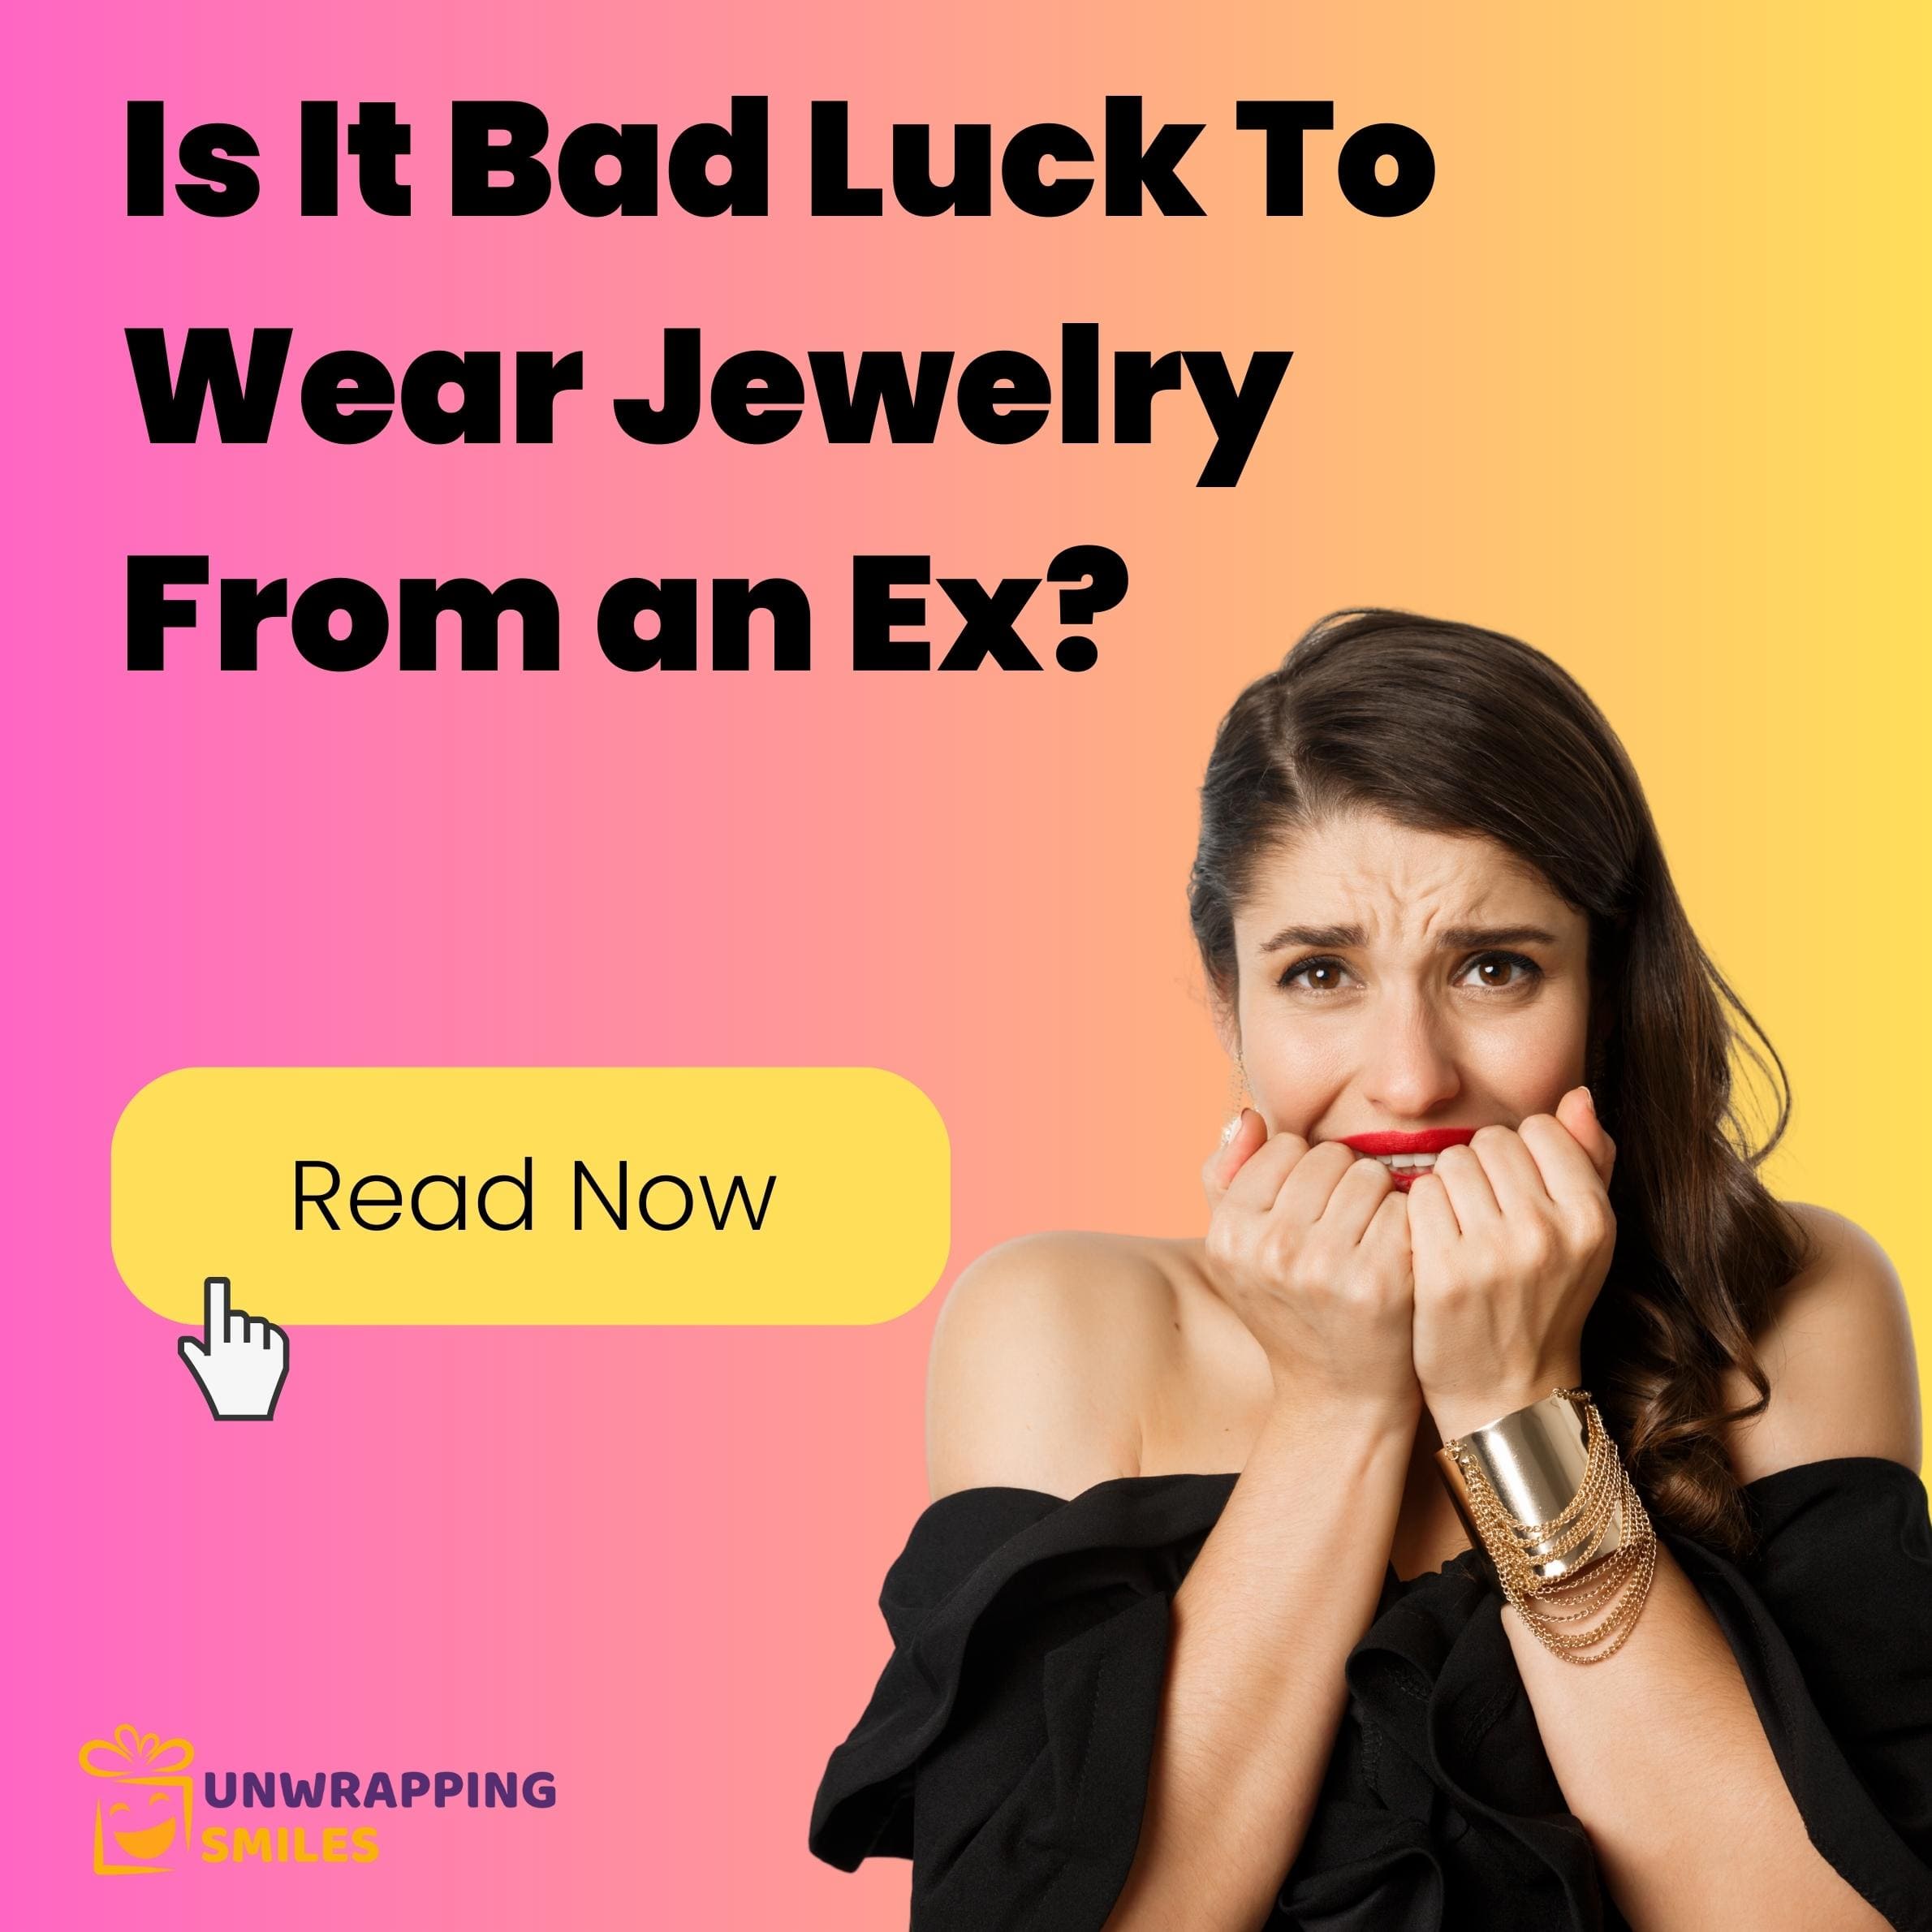 Is It Bad Luck To Wear Jewelry From an Ex Answered